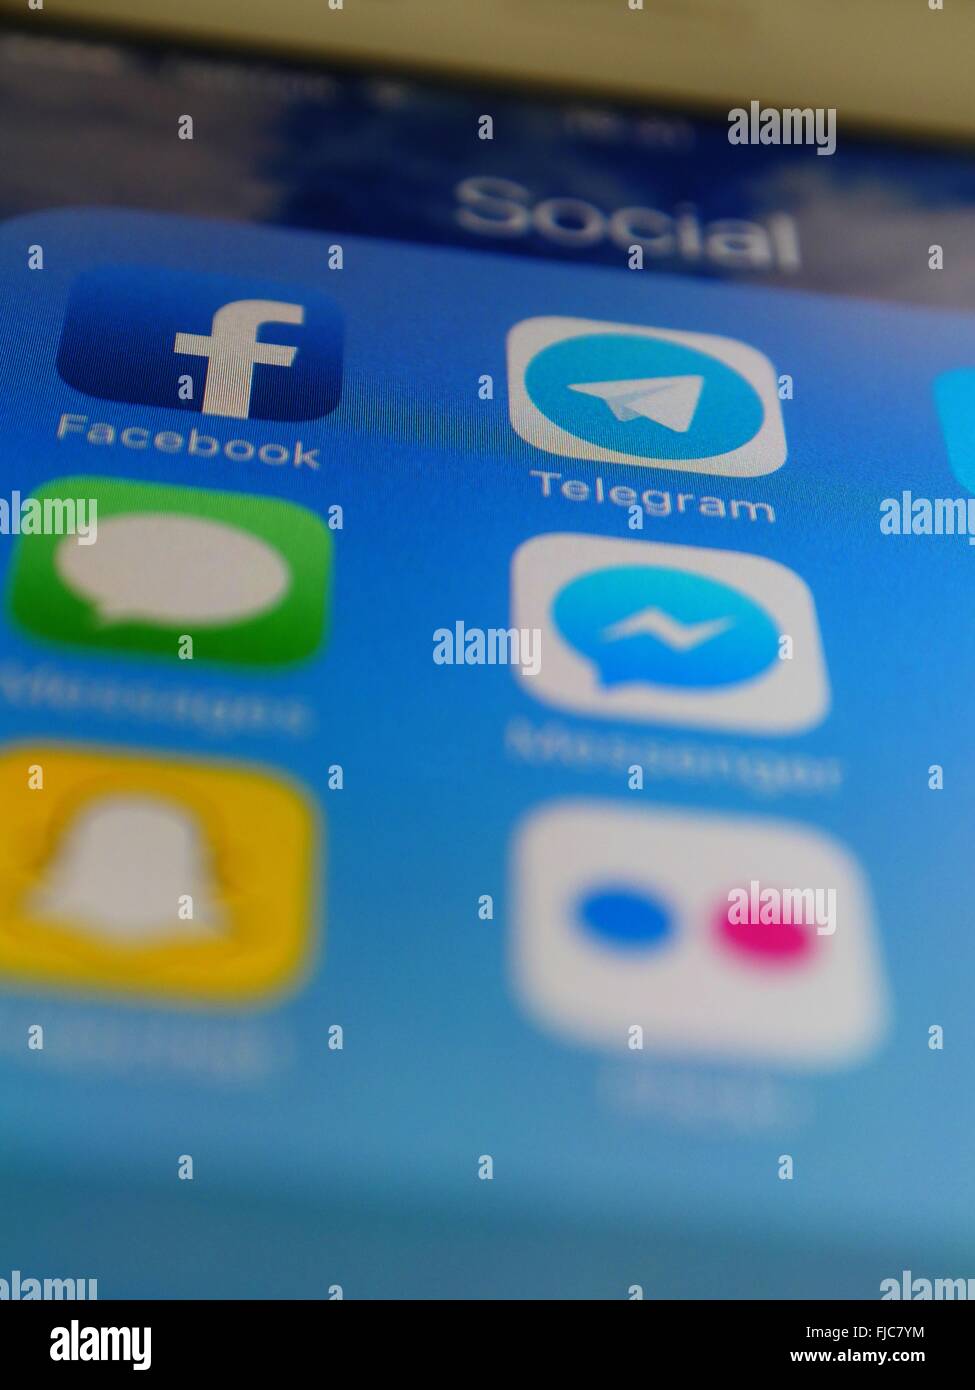 Apple Iphone screen showing apps including facebook and telegram Stock Photo